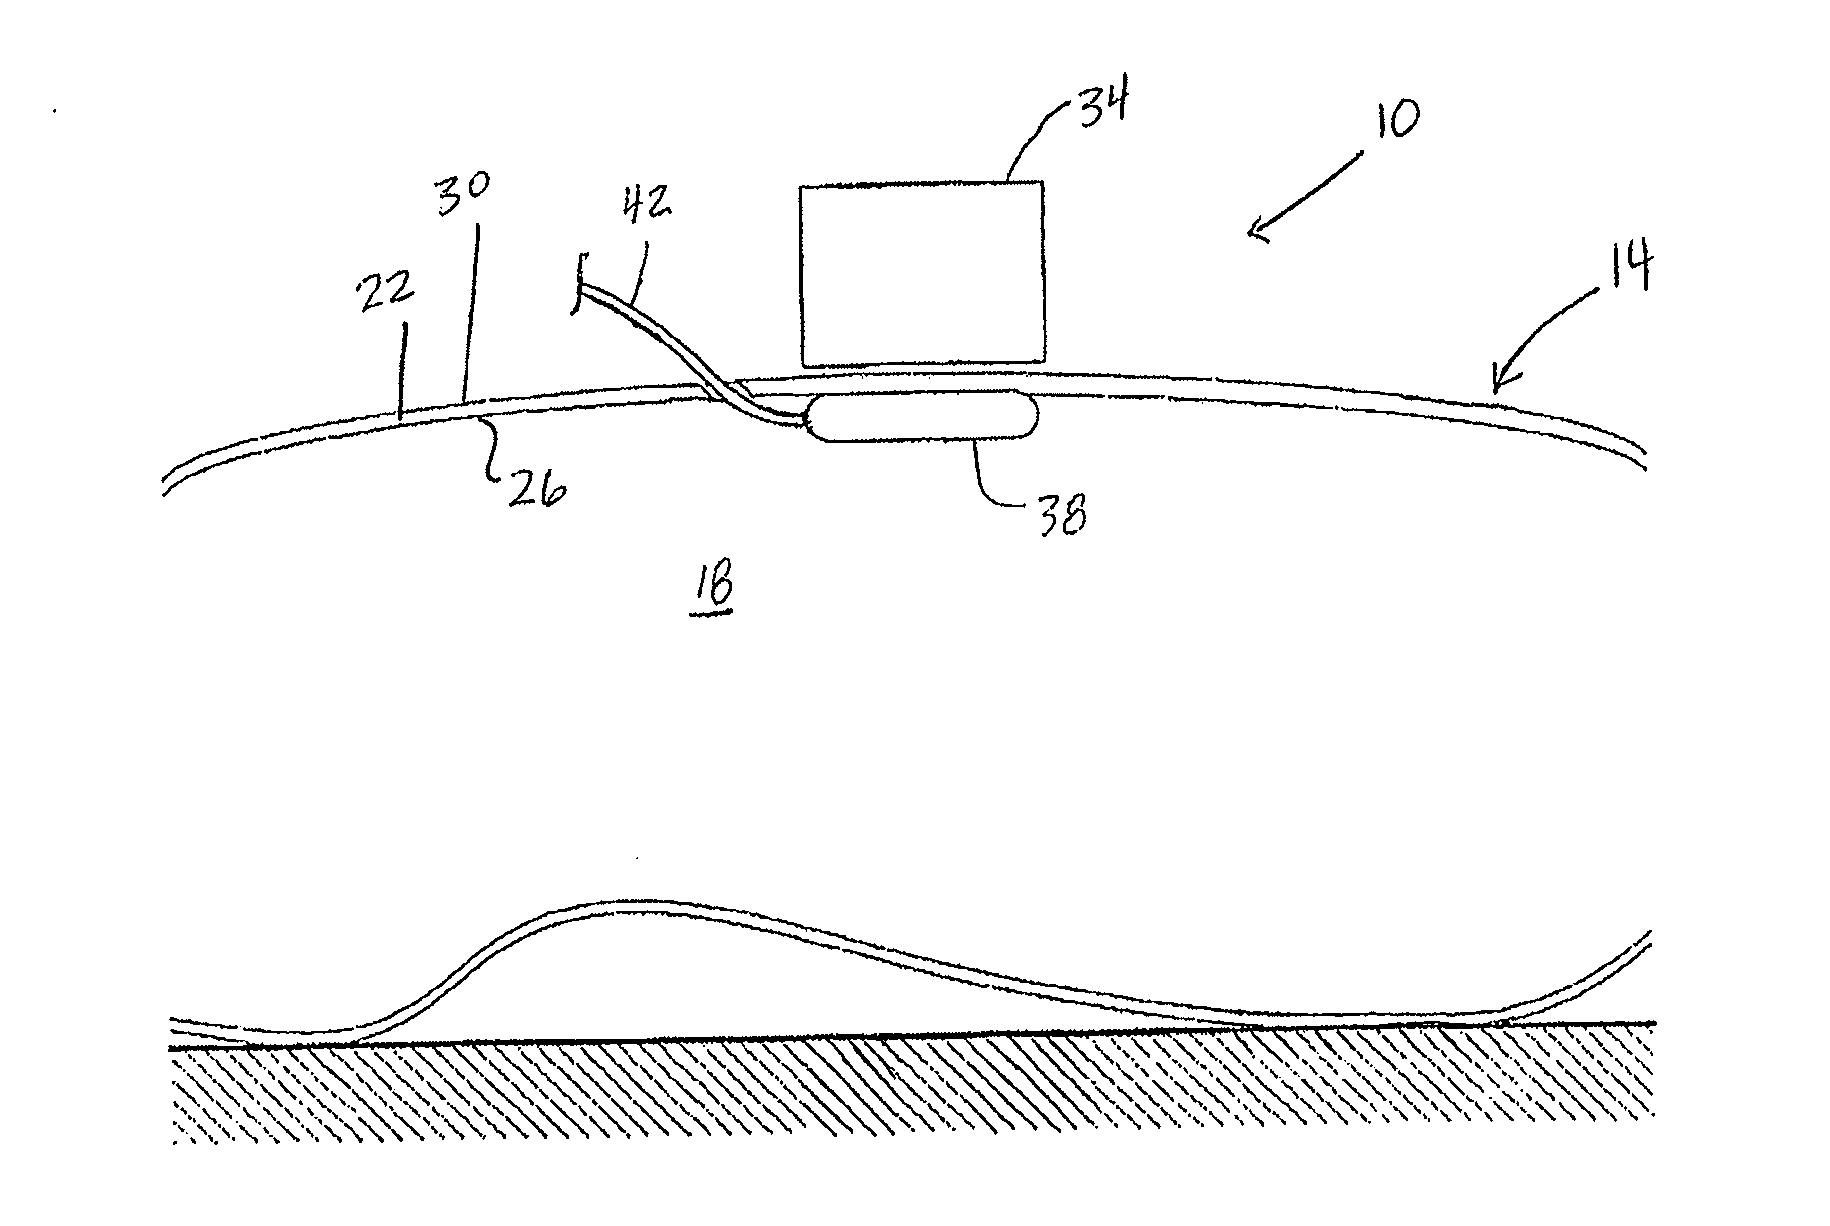 Apparatuses, systems, and methods for use and transport of magnetic medical devices with transport fixtures or safety cages